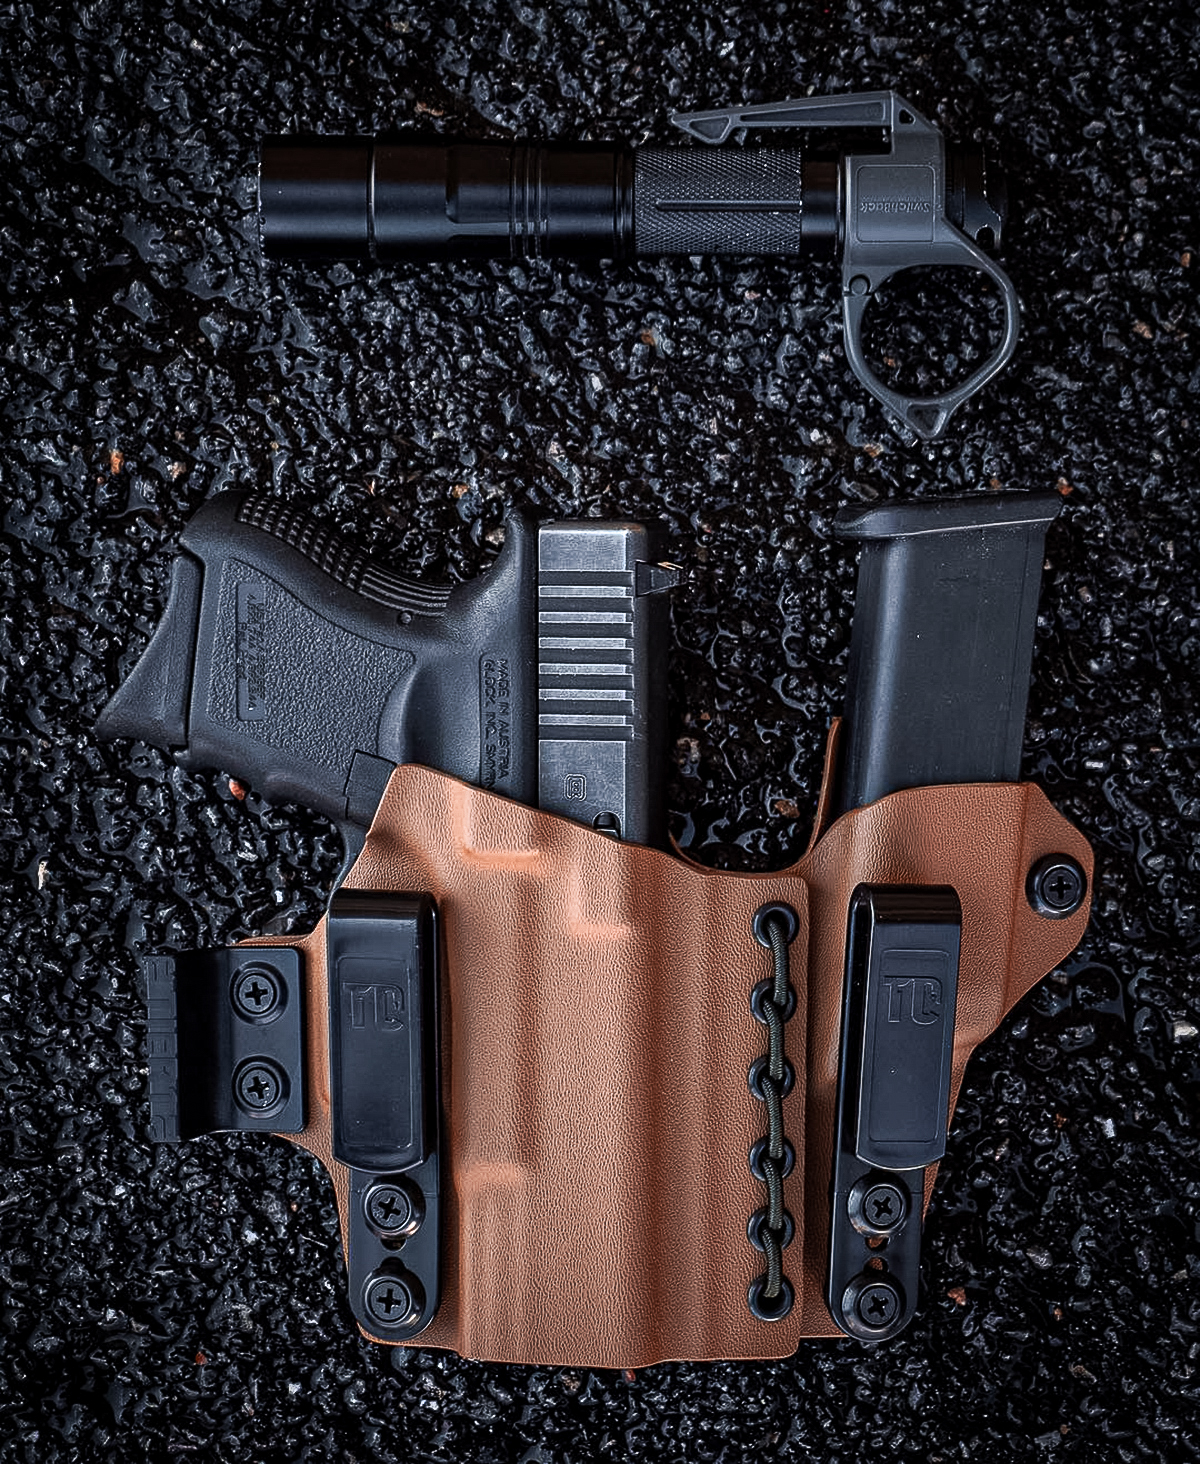 glock 26 concealed carry